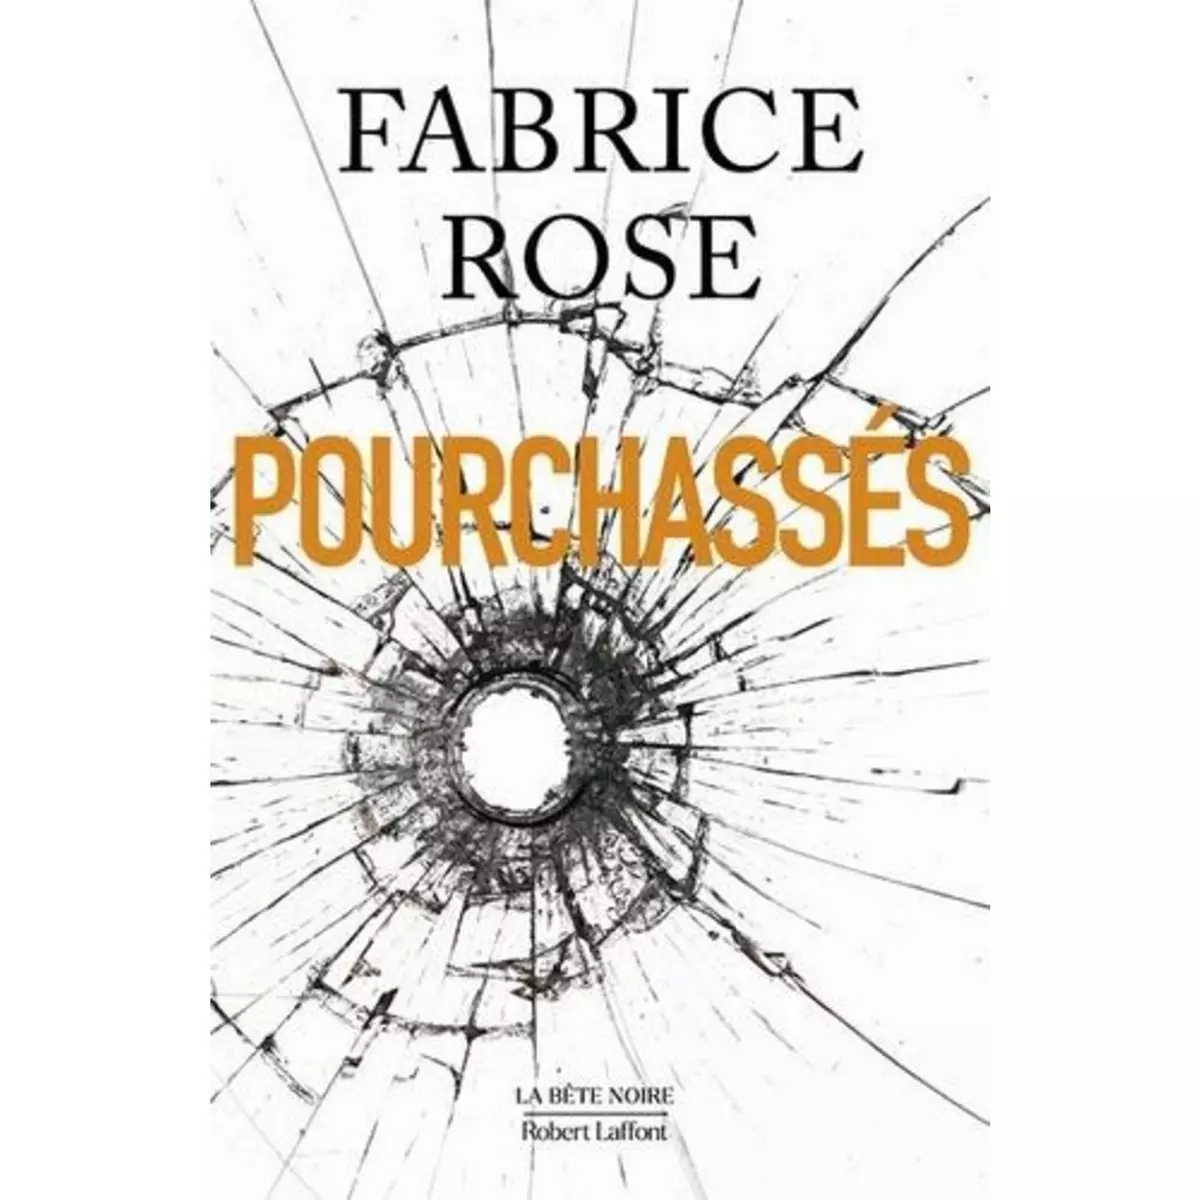  POURCHASSES, Rose Fabrice